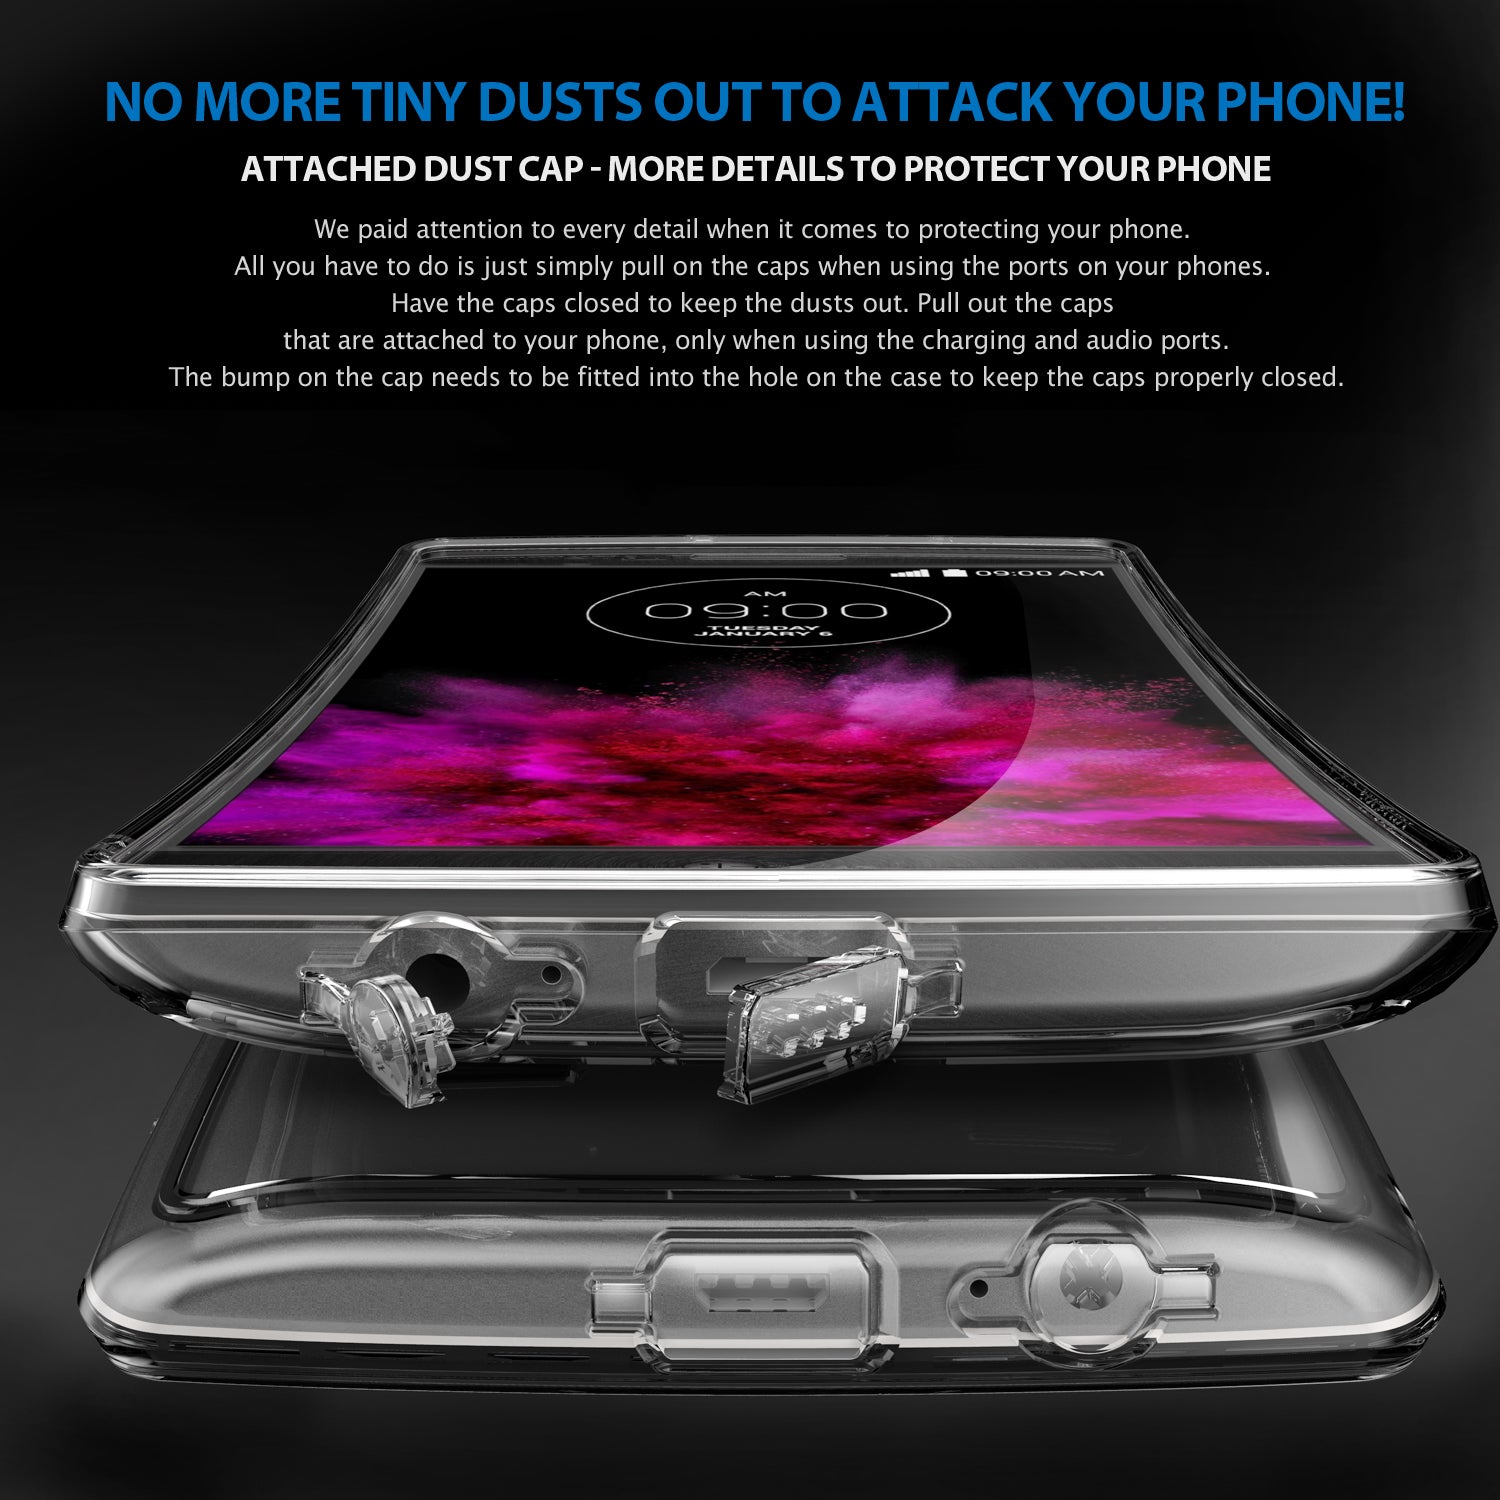 LG G Flex 2 Case | Fusion - No more tiny dusts out to attack your phone!